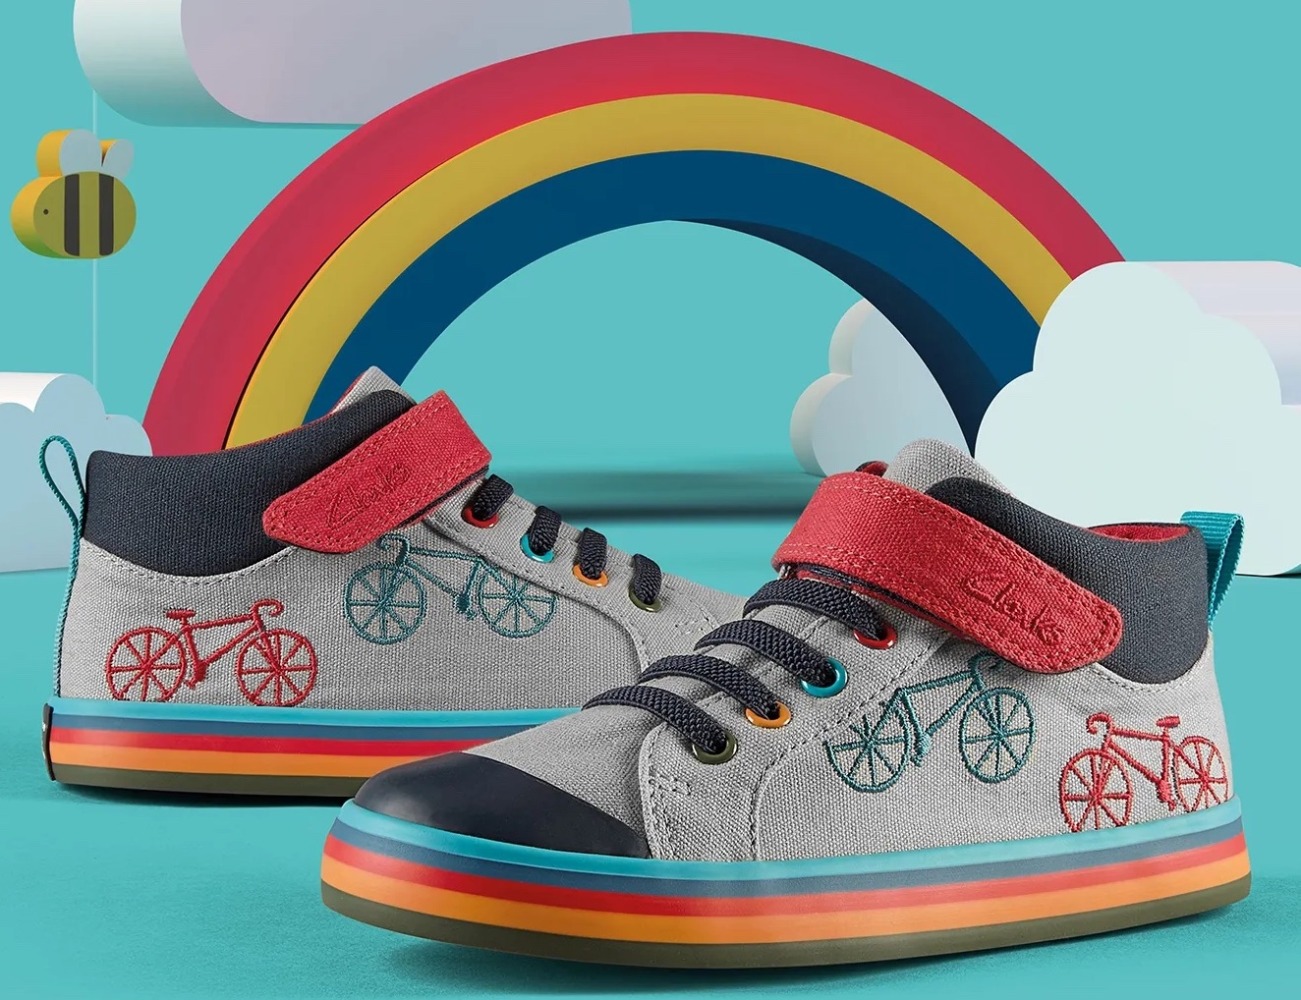 Frugi x Clarks bicycle shoes for kids